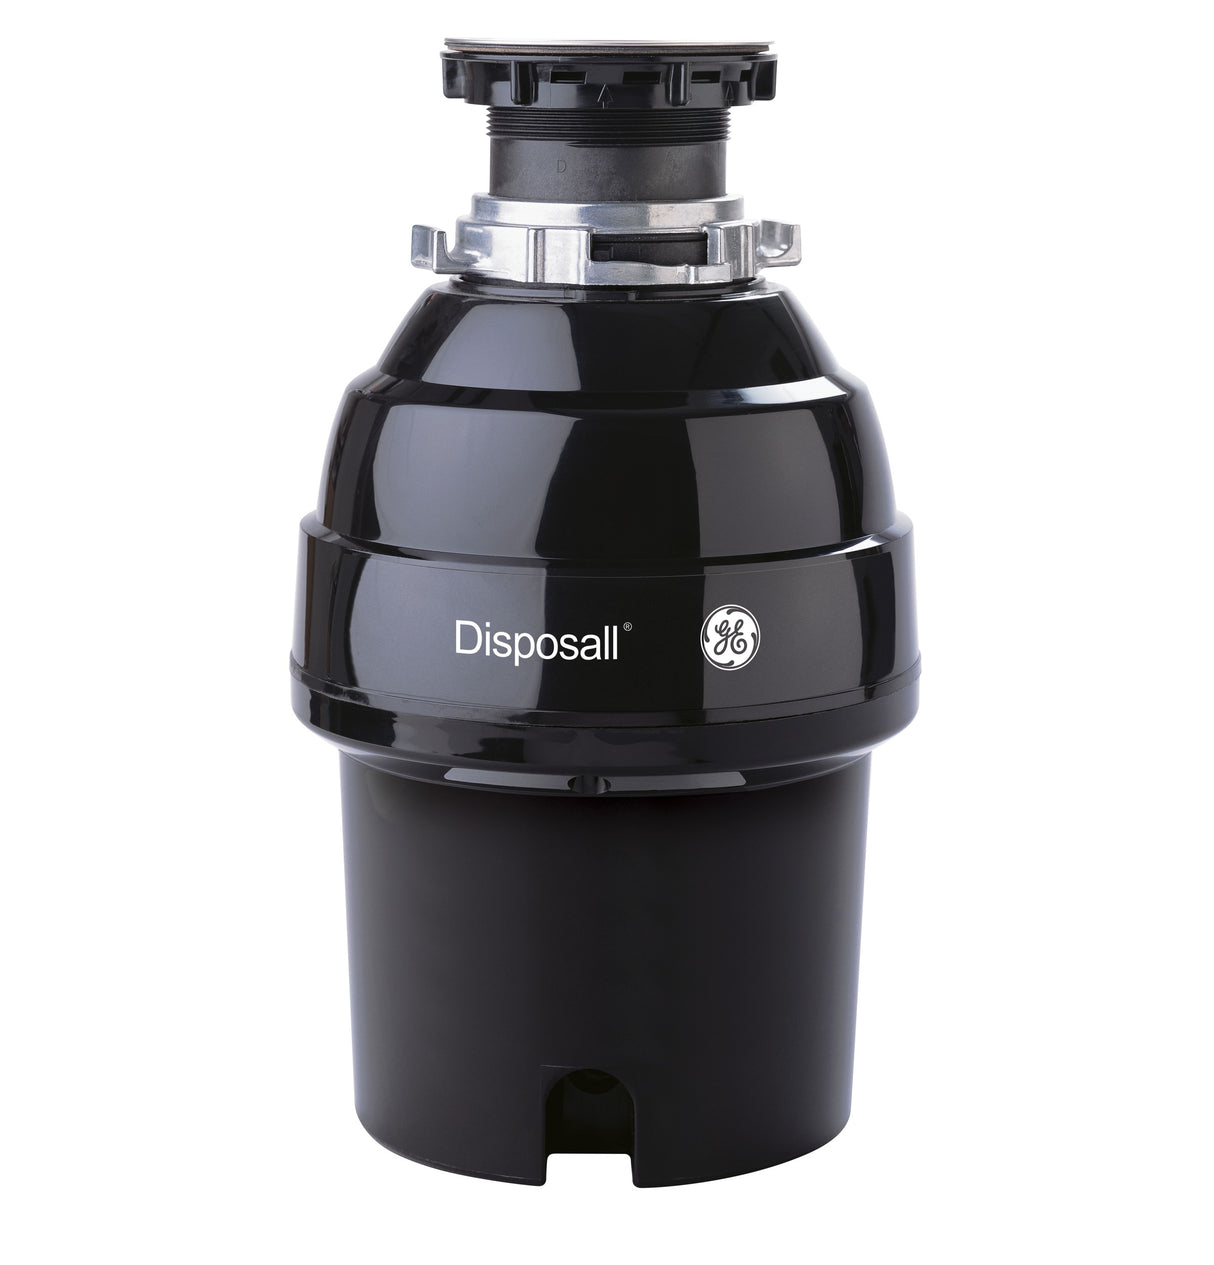 GE DISPOSALL(R) 3/4 HP Continuous Feed Garbage Disposer - Non-Corded - (GFC720N)